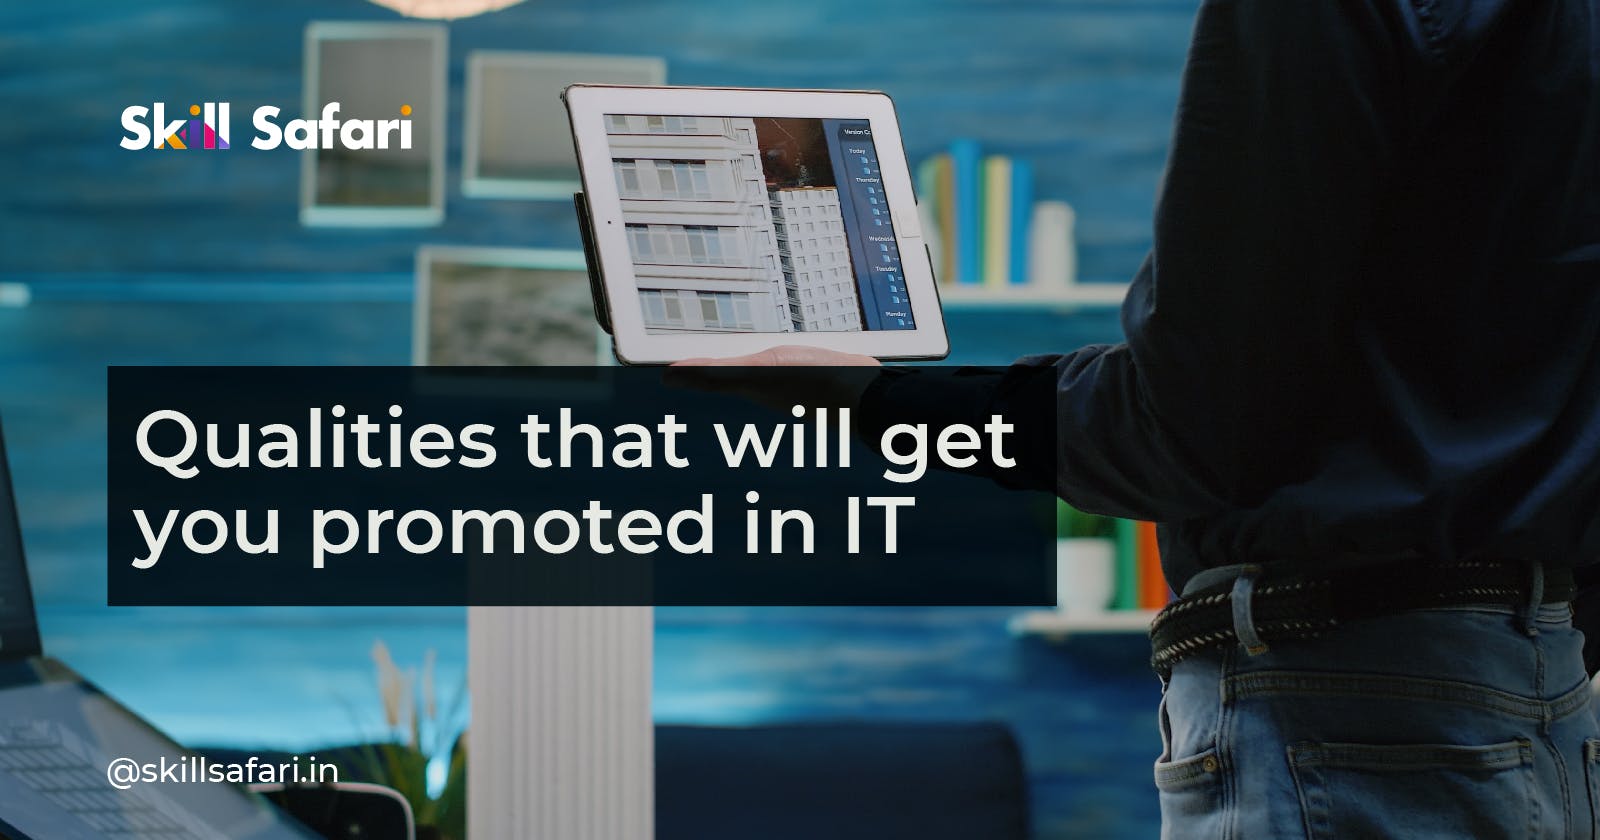 Qualities that will get you promoted in IT